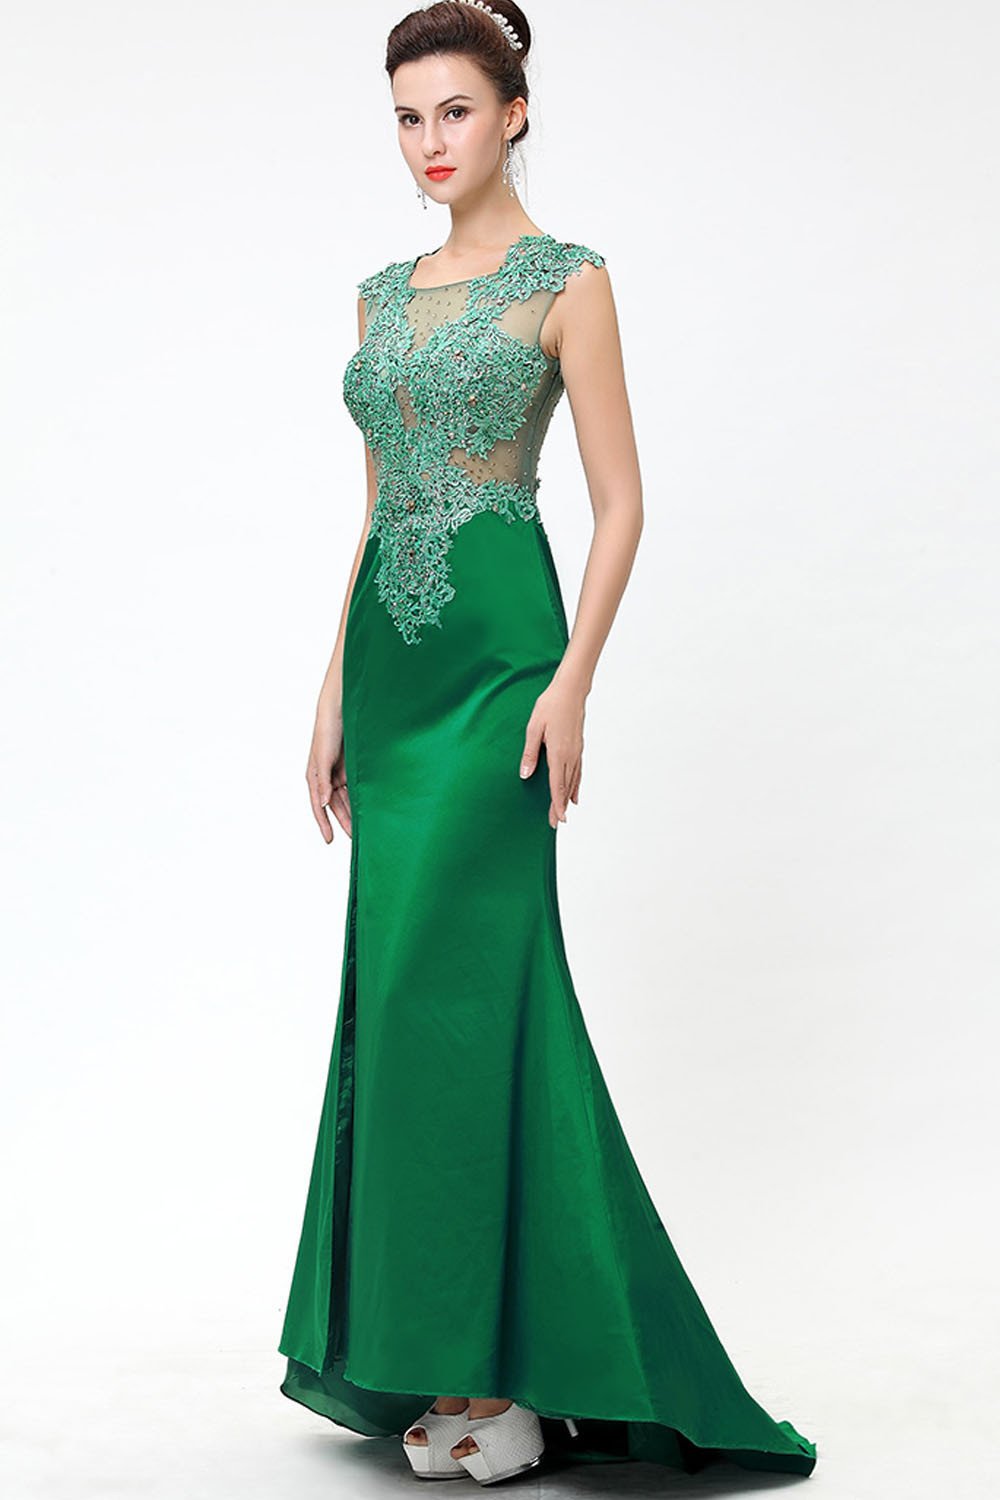 Green Lace Beaded See Through Mermaid Sexy Prom Dresses ED0850